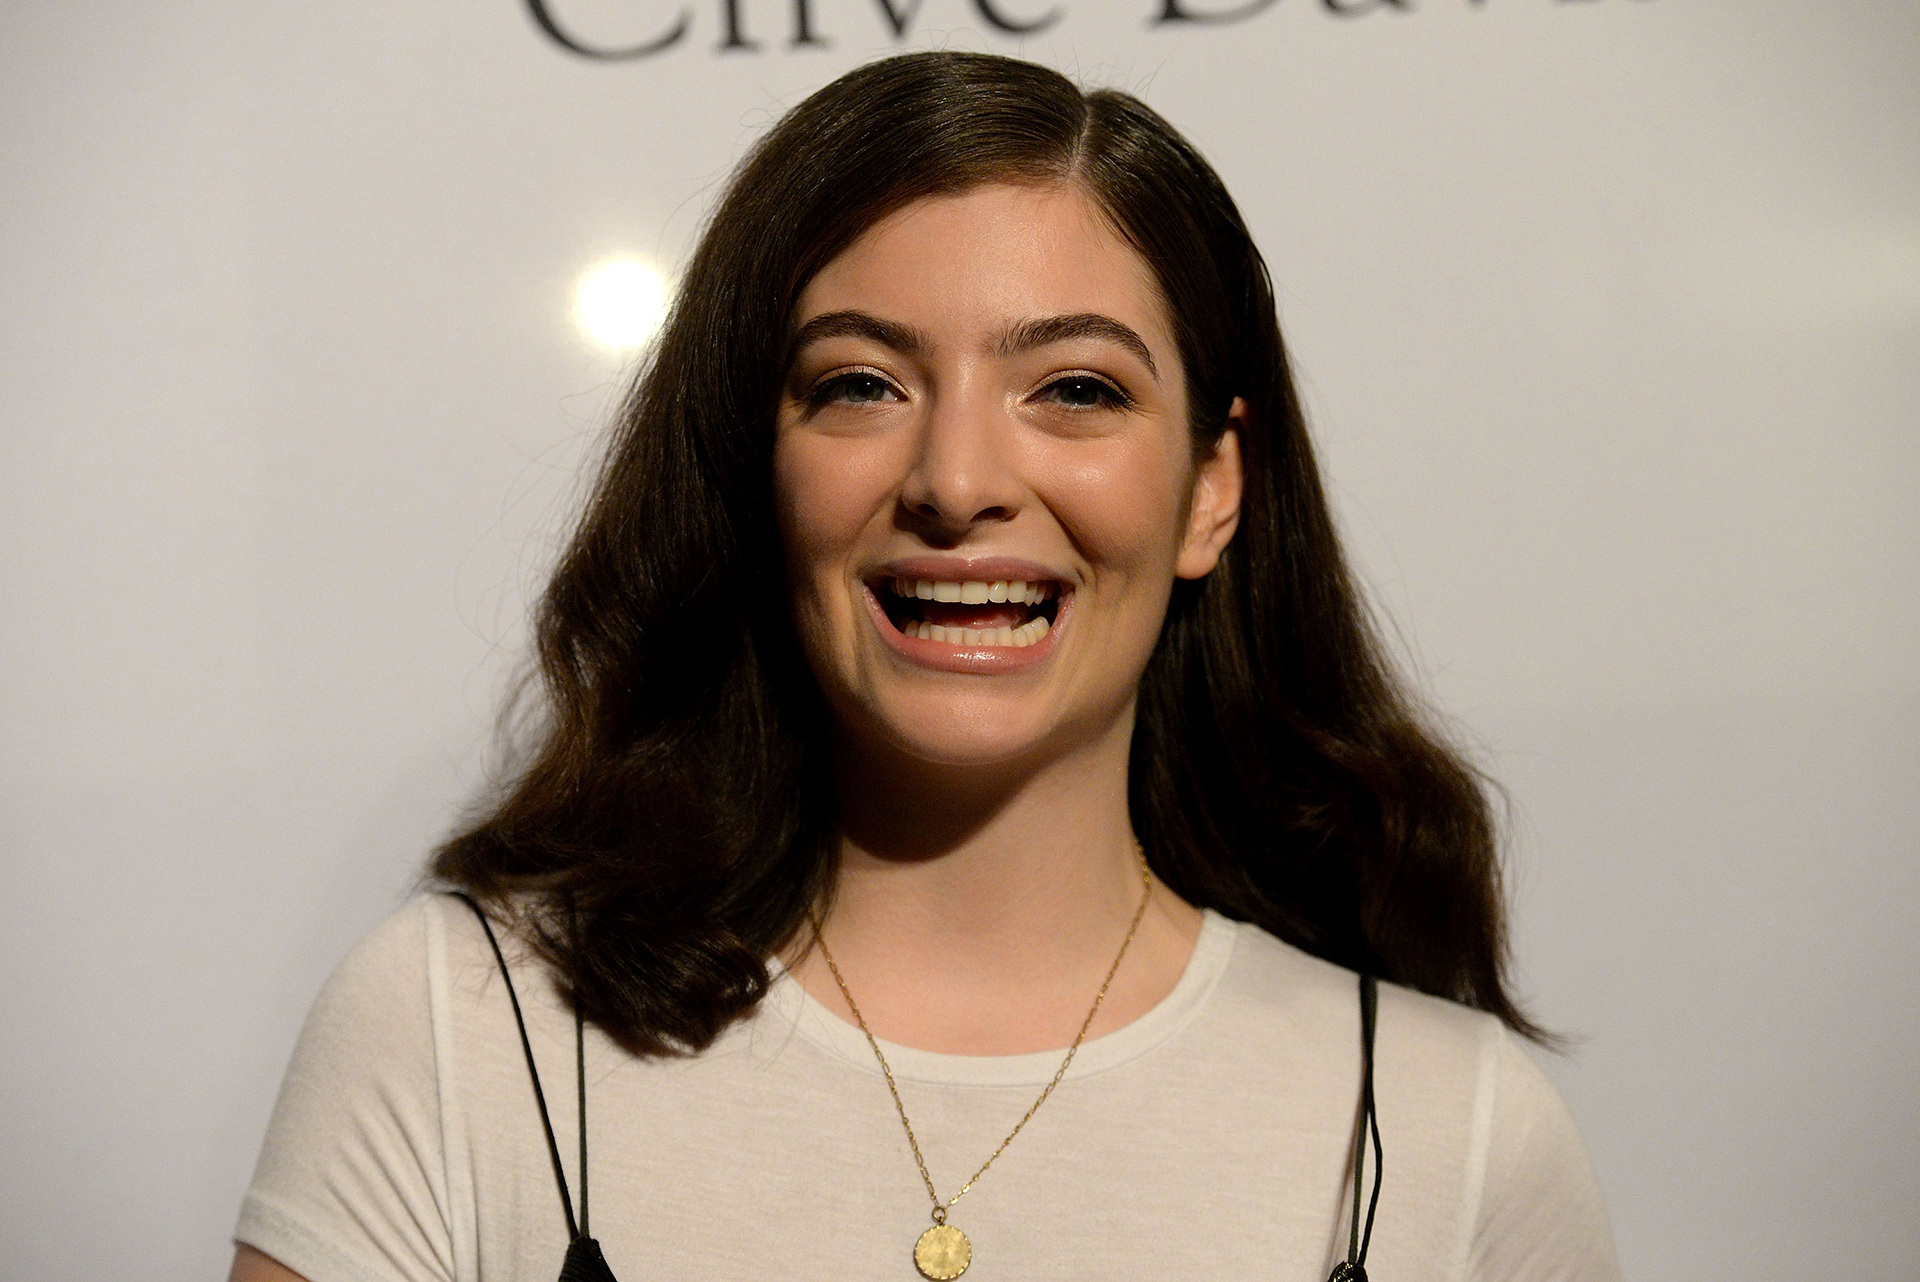 LISTEN: Lorde releases first single from new album